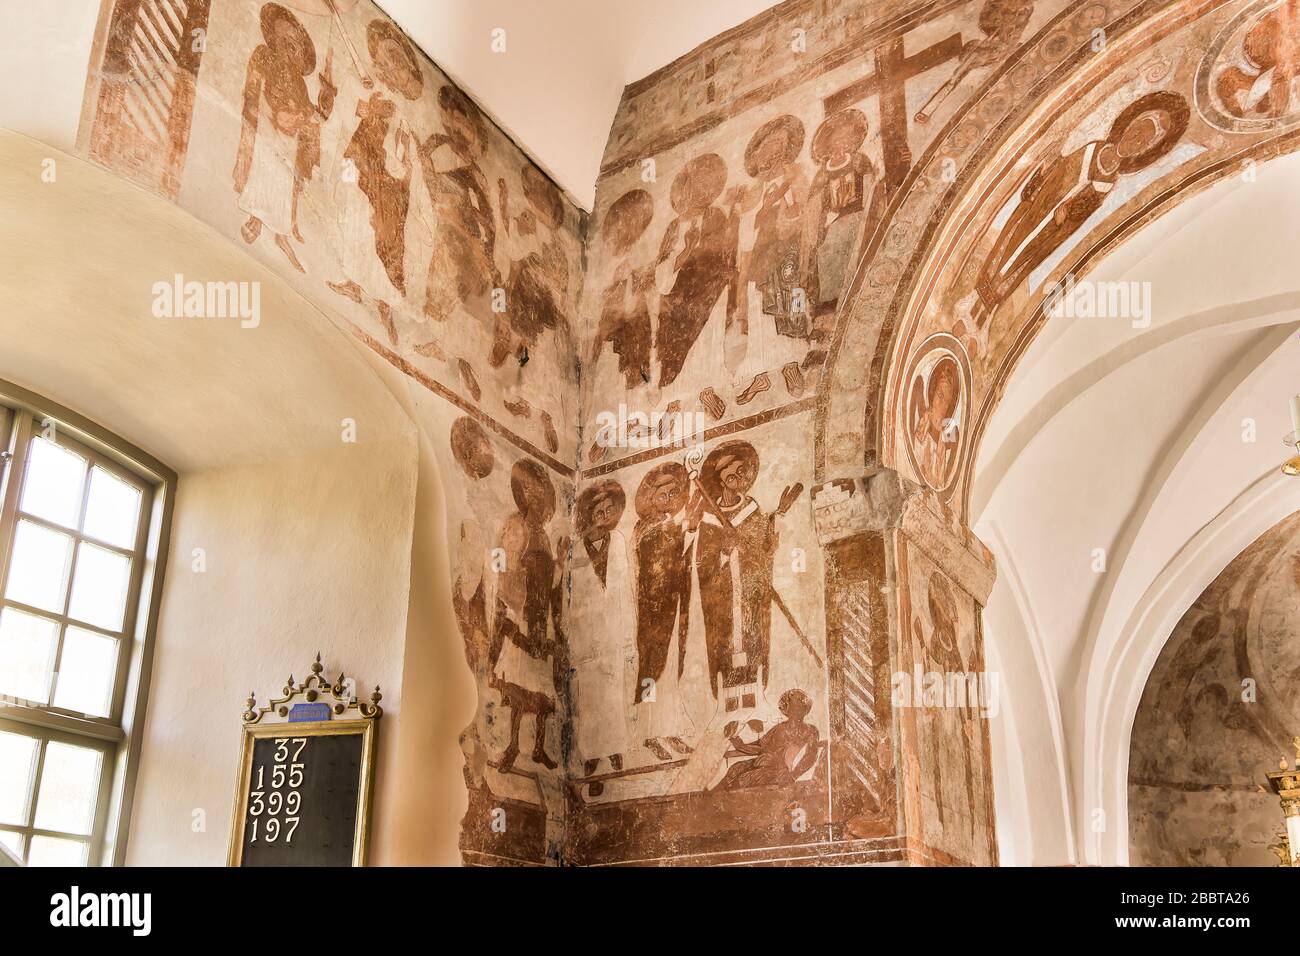 Romanesque frescos from 1125 on the walls of Finja church in Sweden, May 9, 2018 Stock Photo